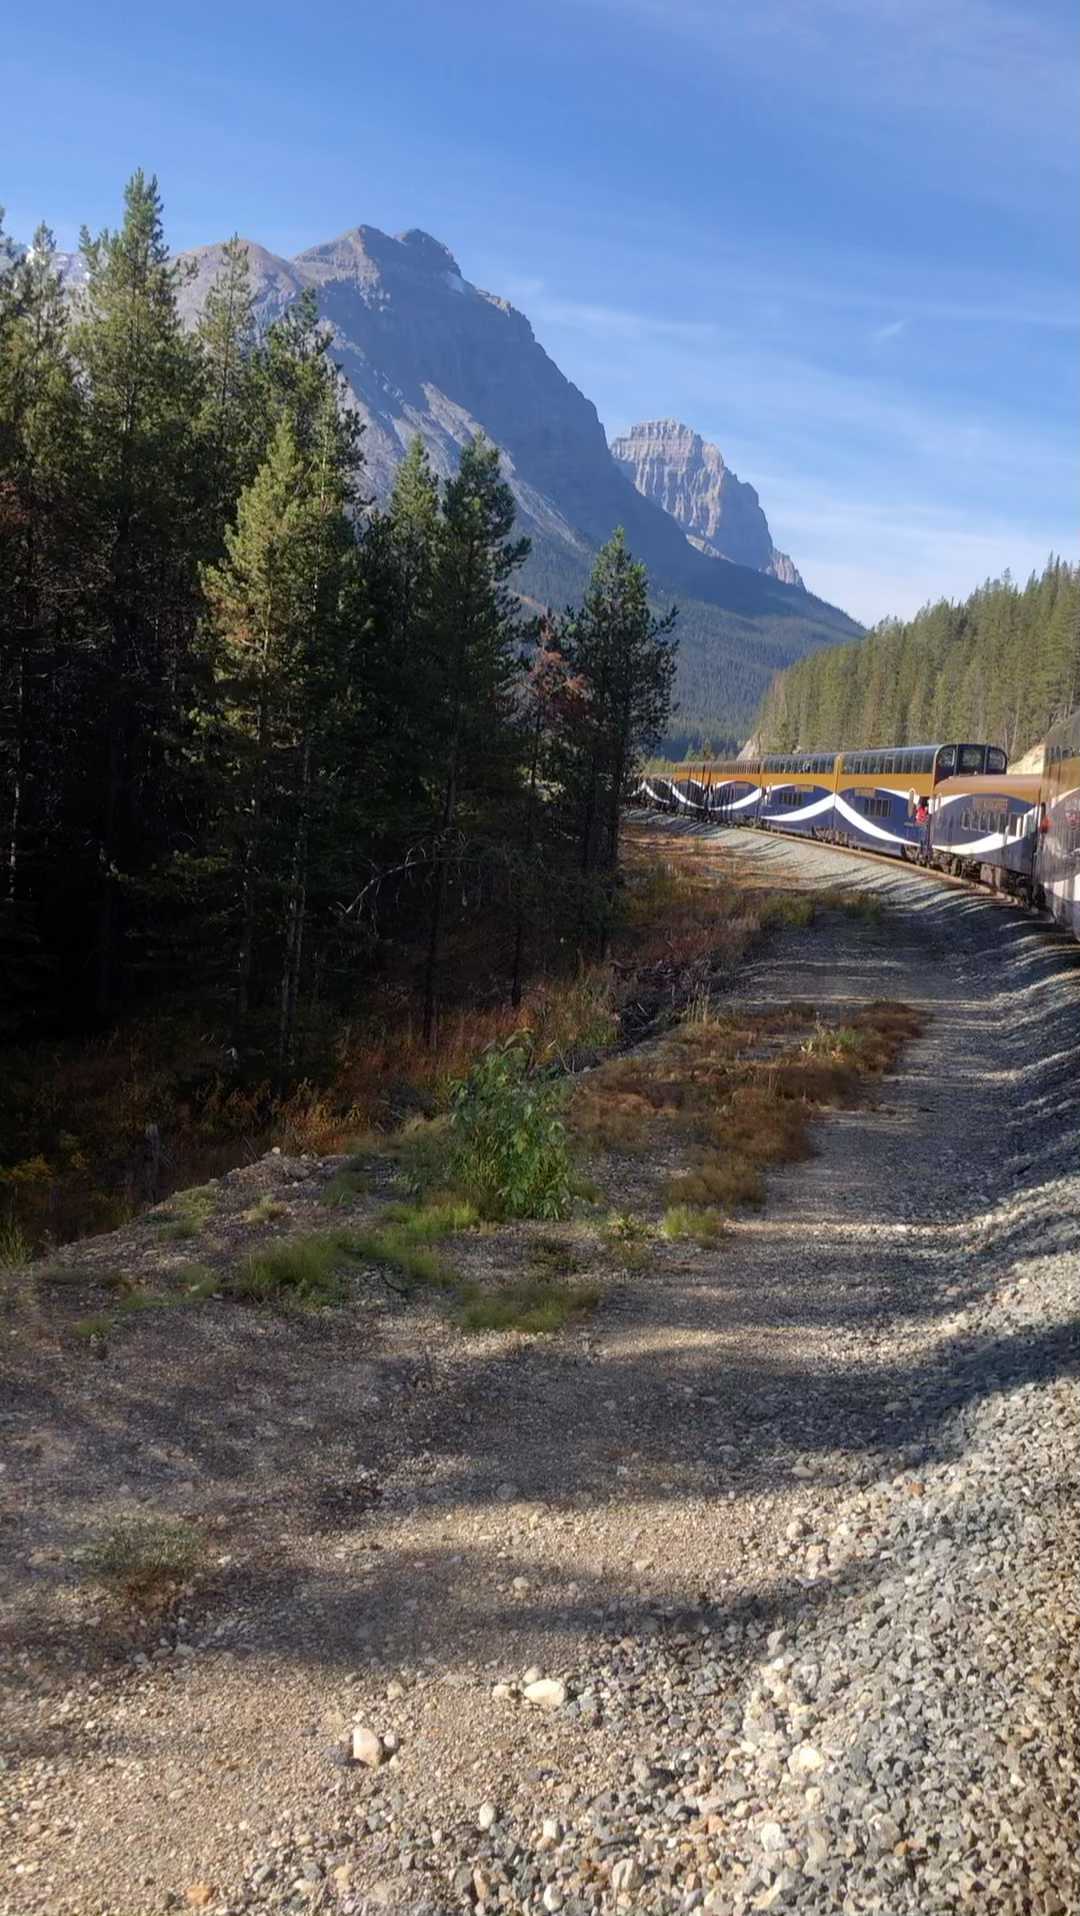 Rocky Mountaineer voyage day 1 from Banff to Kamloops. #bucketlist